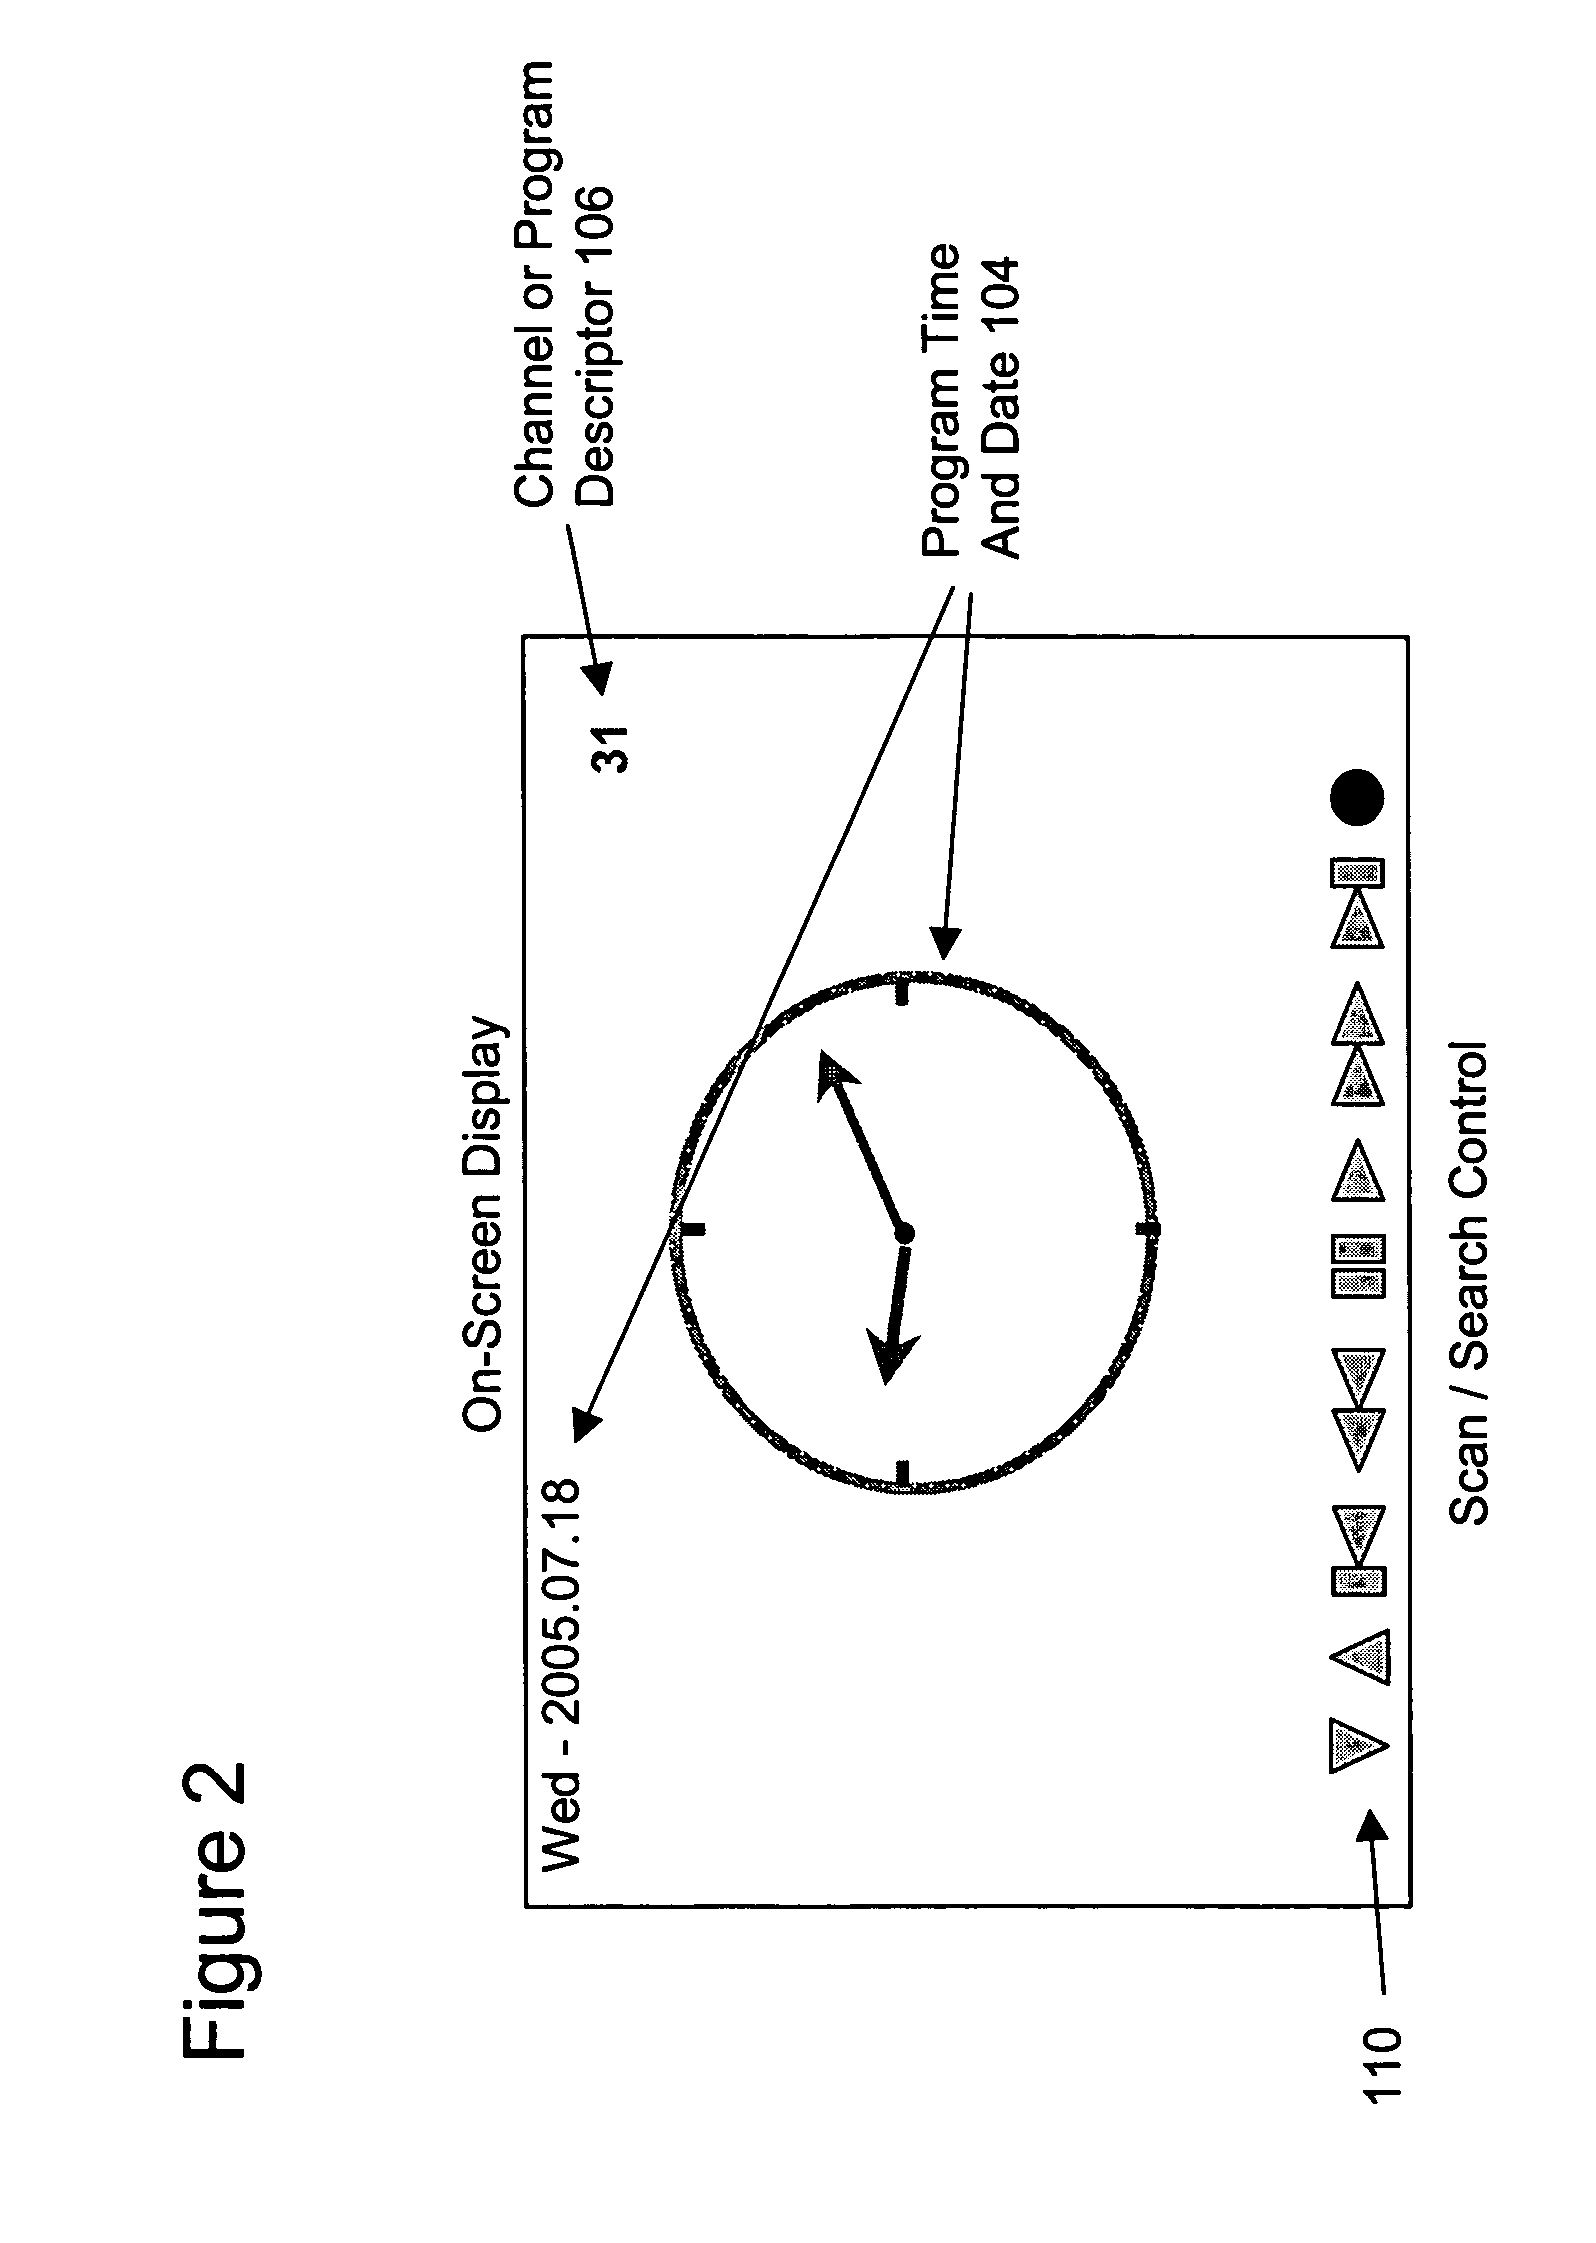 Method and system for buffered digital entertainment